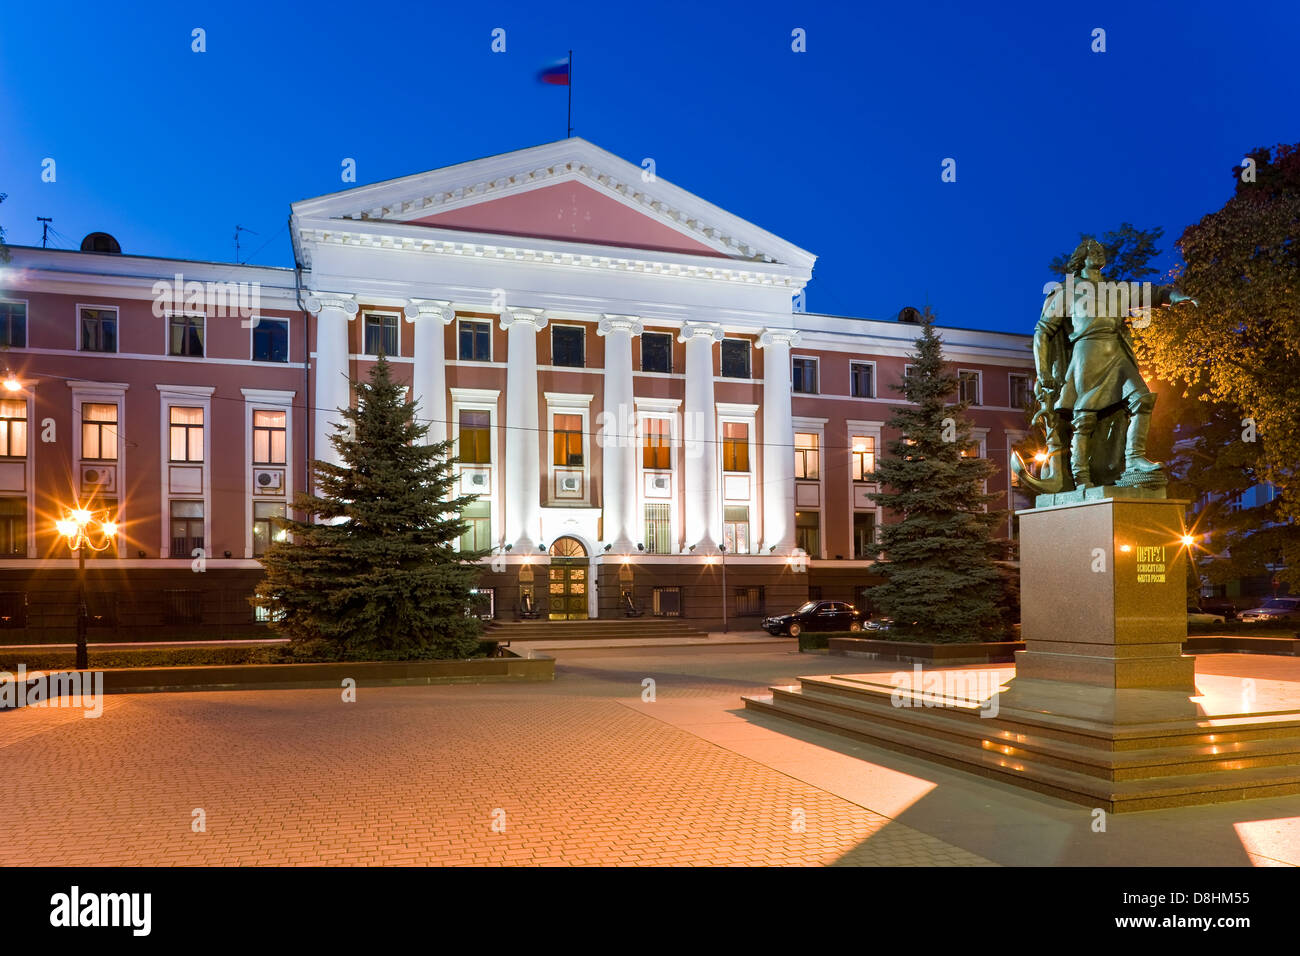 Russia, Kaliningrad, Administration building of the Russian Baltic Naval fleet and statue of Peter the Great Stock Photo